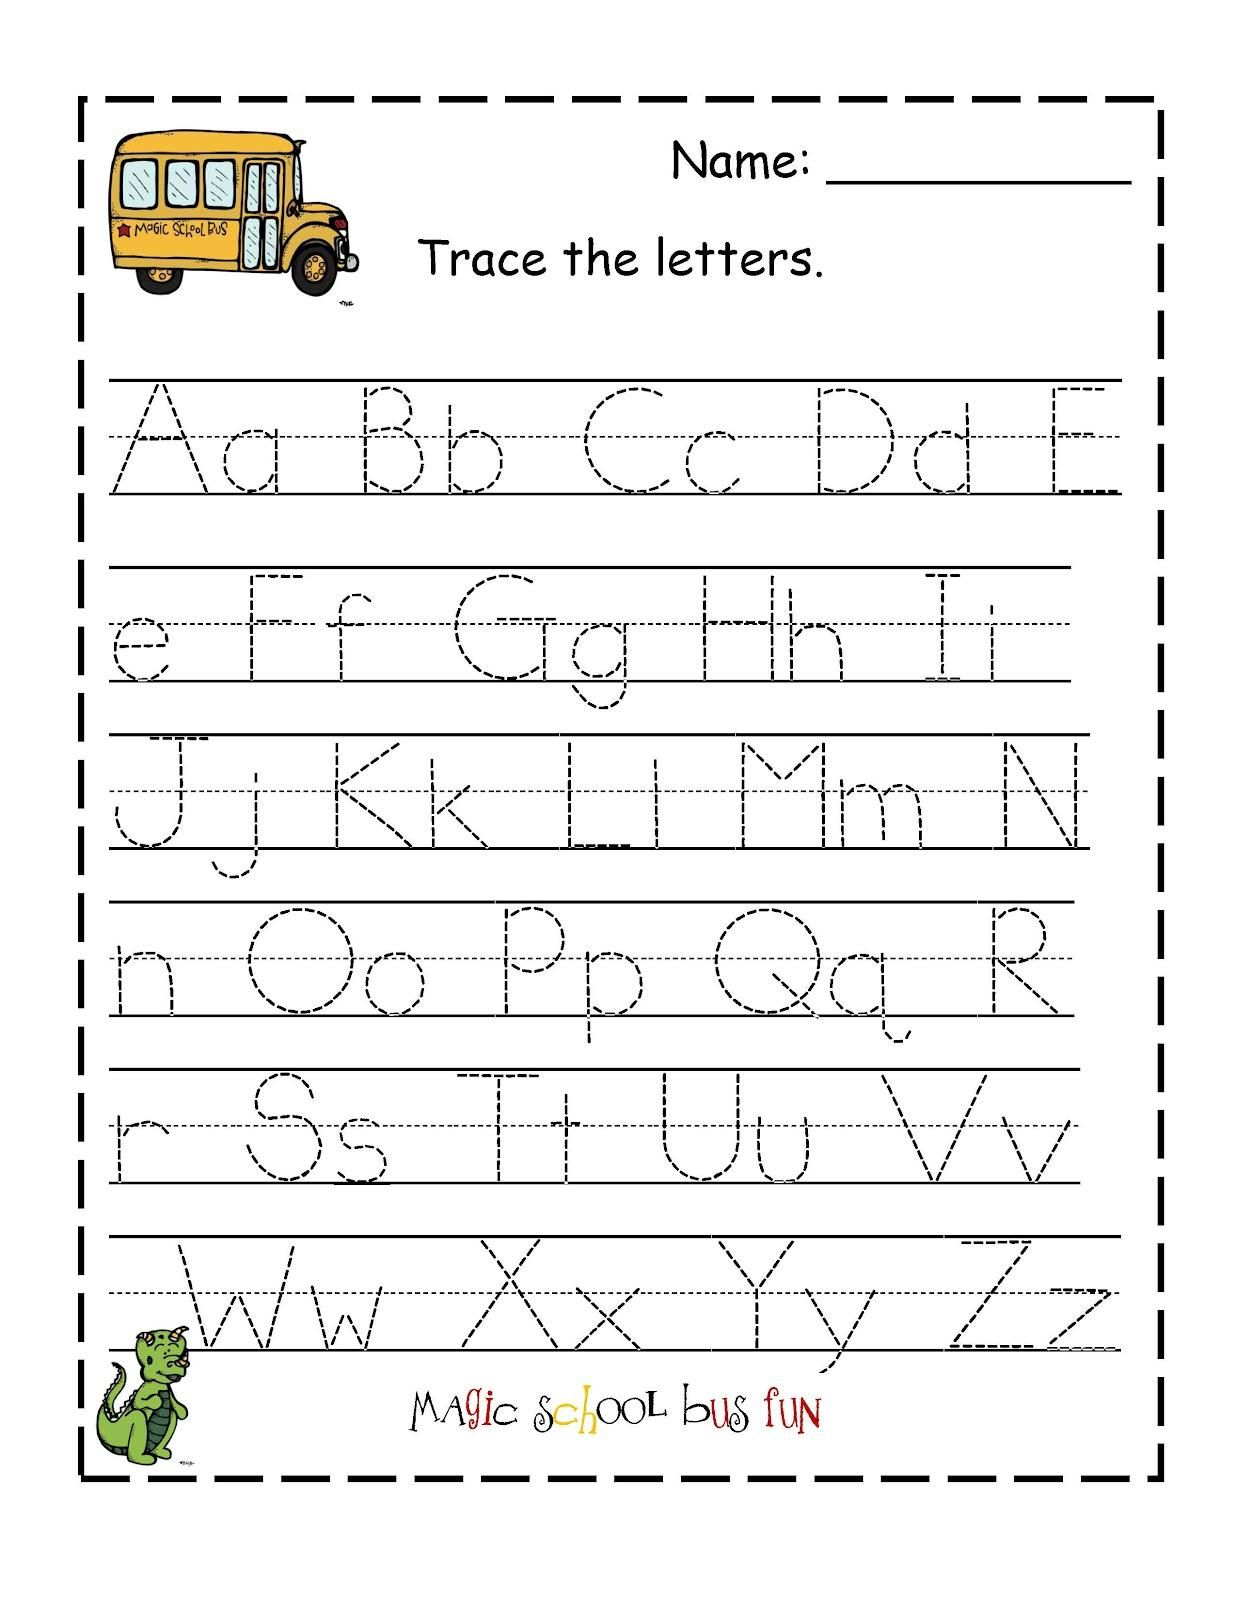 Free Printable Abc Tracing Worksheets #2 | Preschool with regard to Tracing Letters Abc